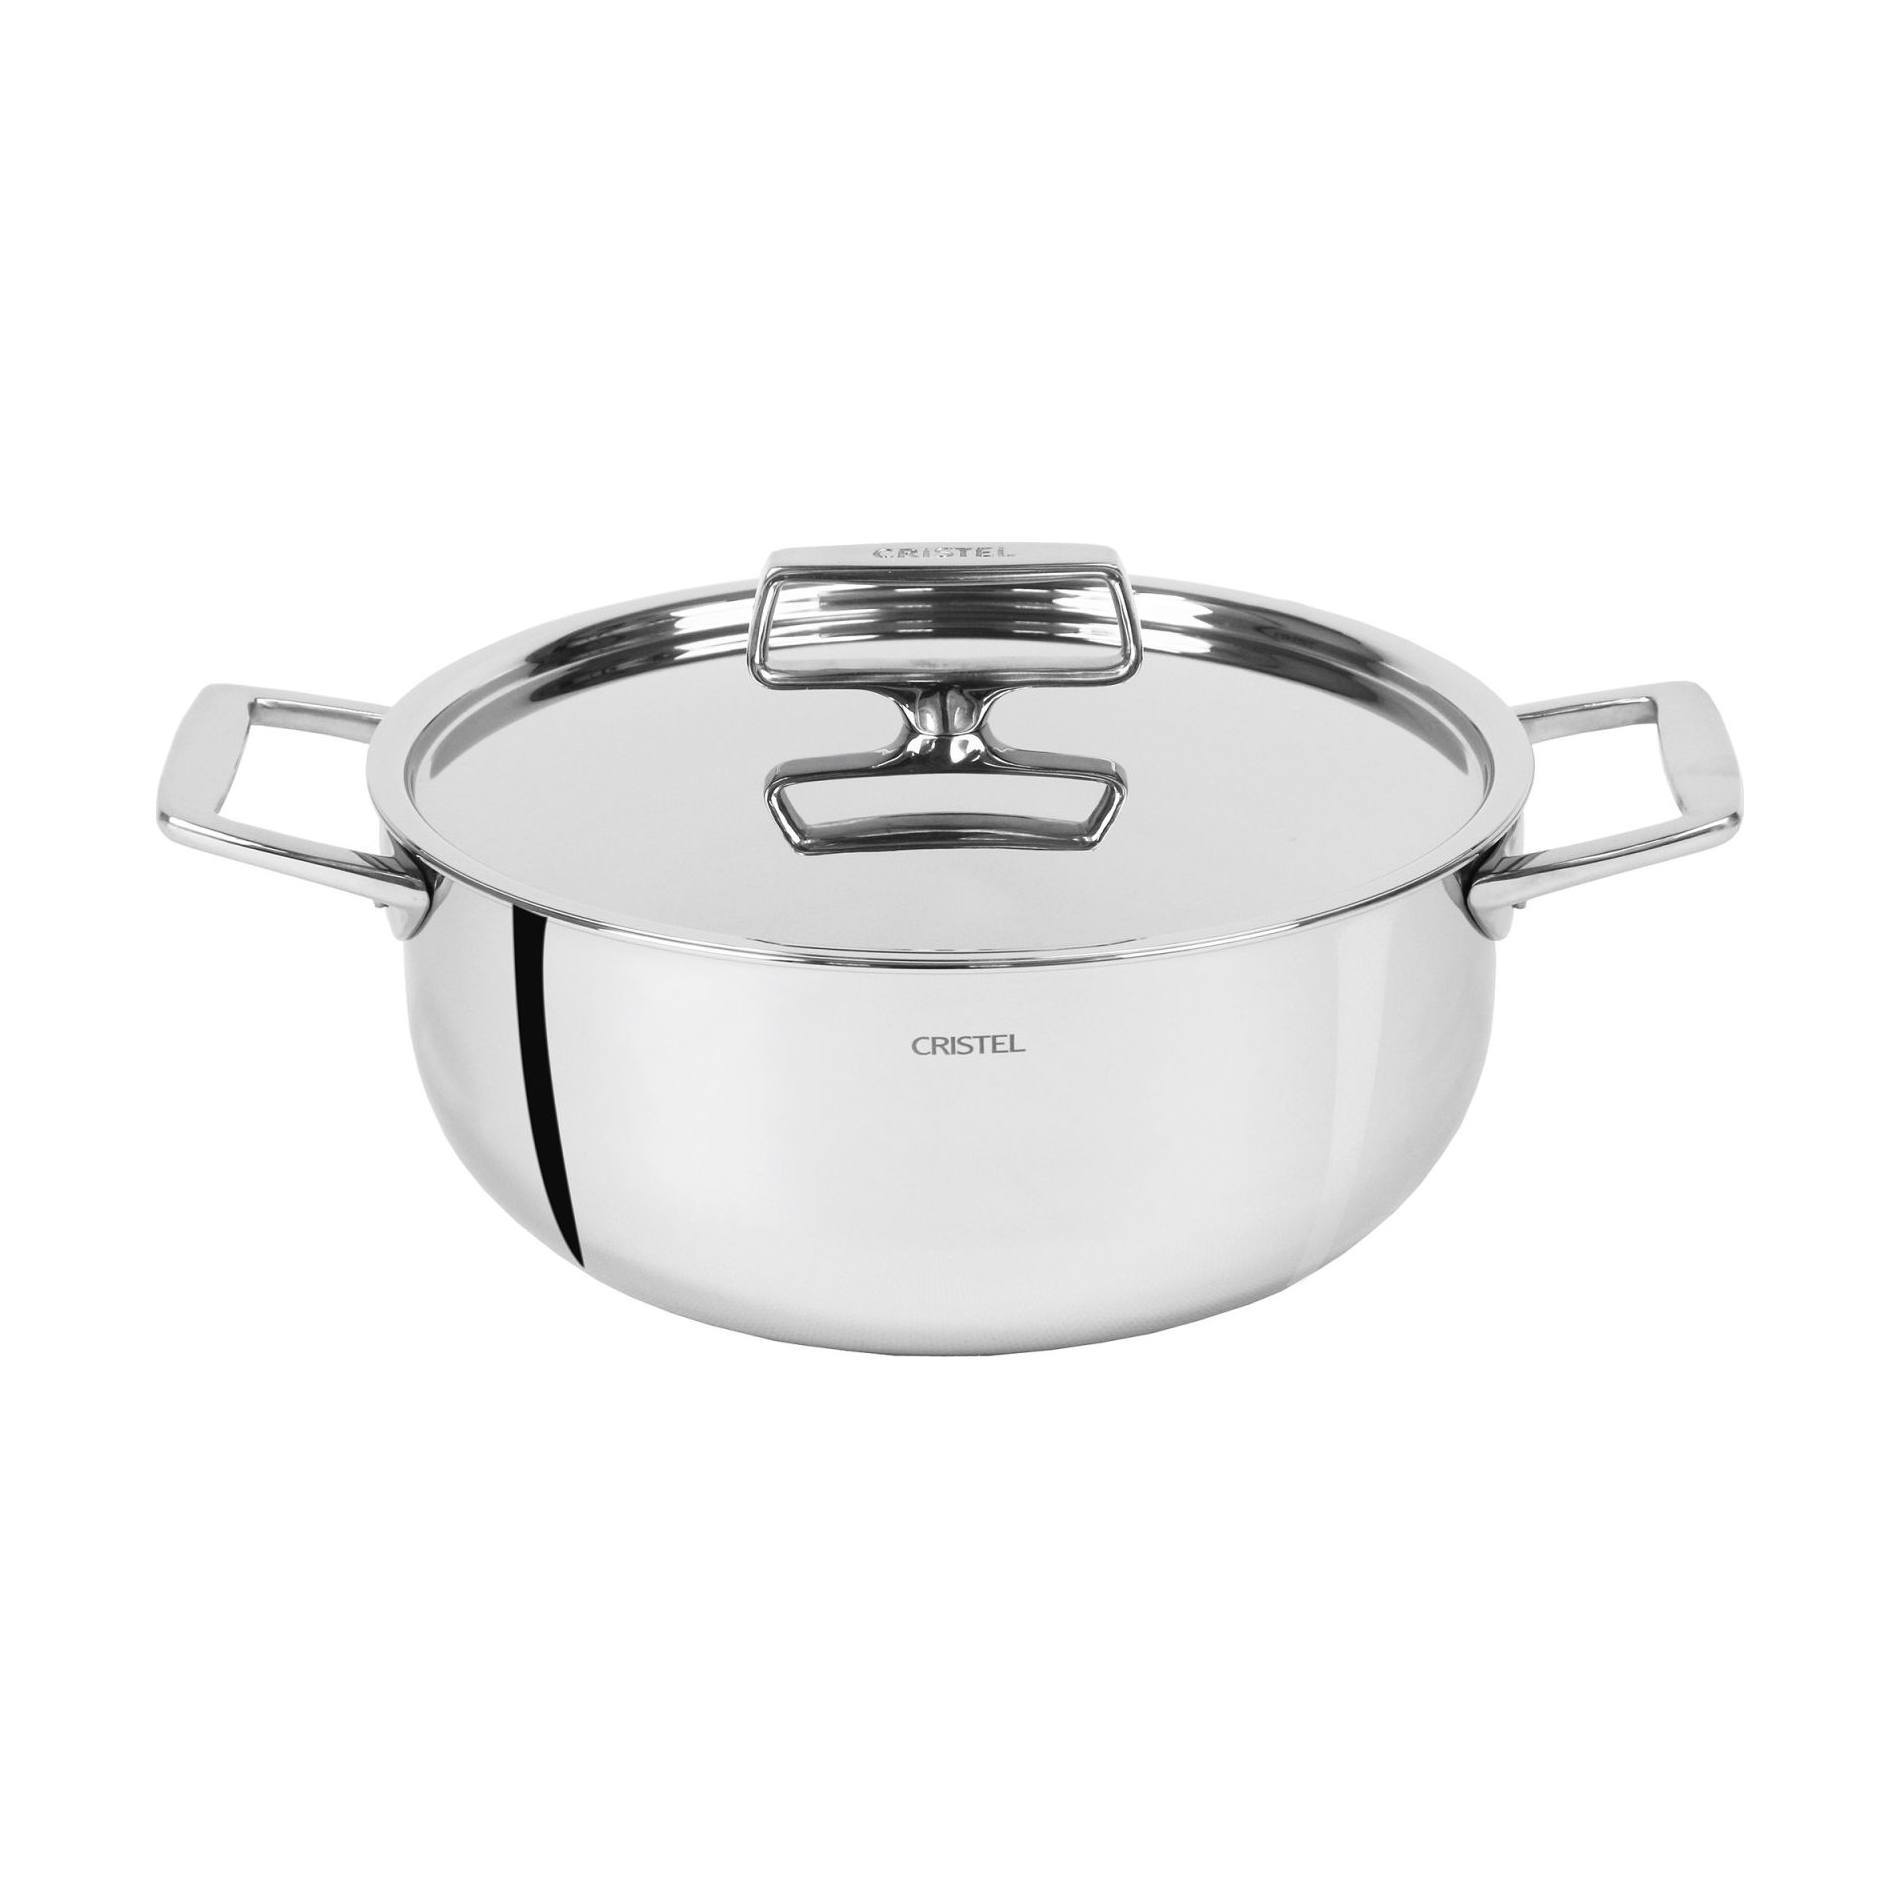 Castel Pro stewpan with lid 20 cm stainless steel Cristel